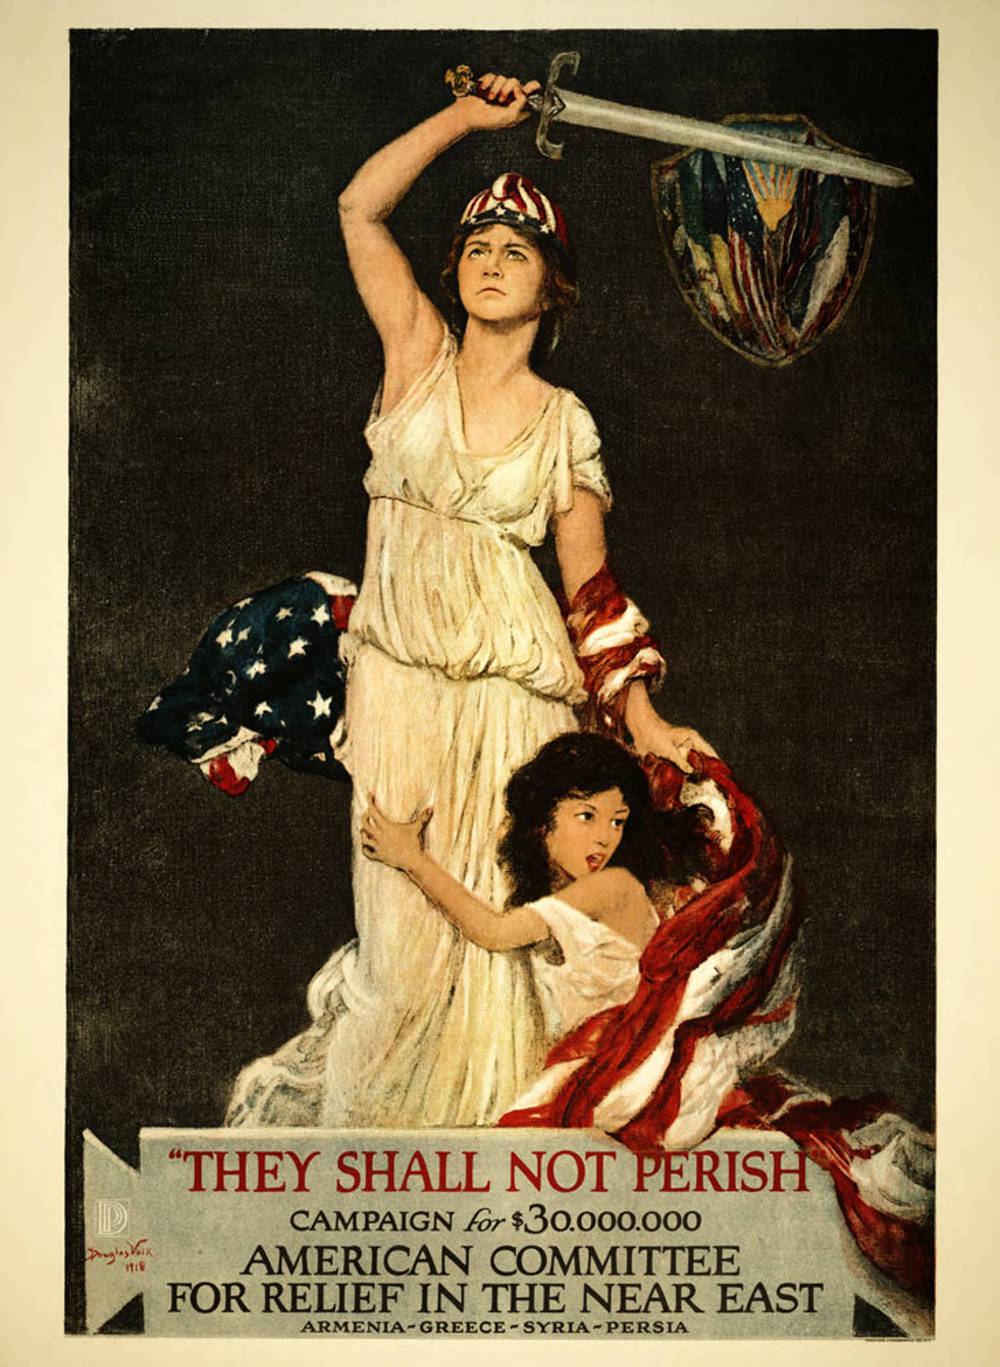 Columbia, World War I Poster, Pritzker Military Museum & Library